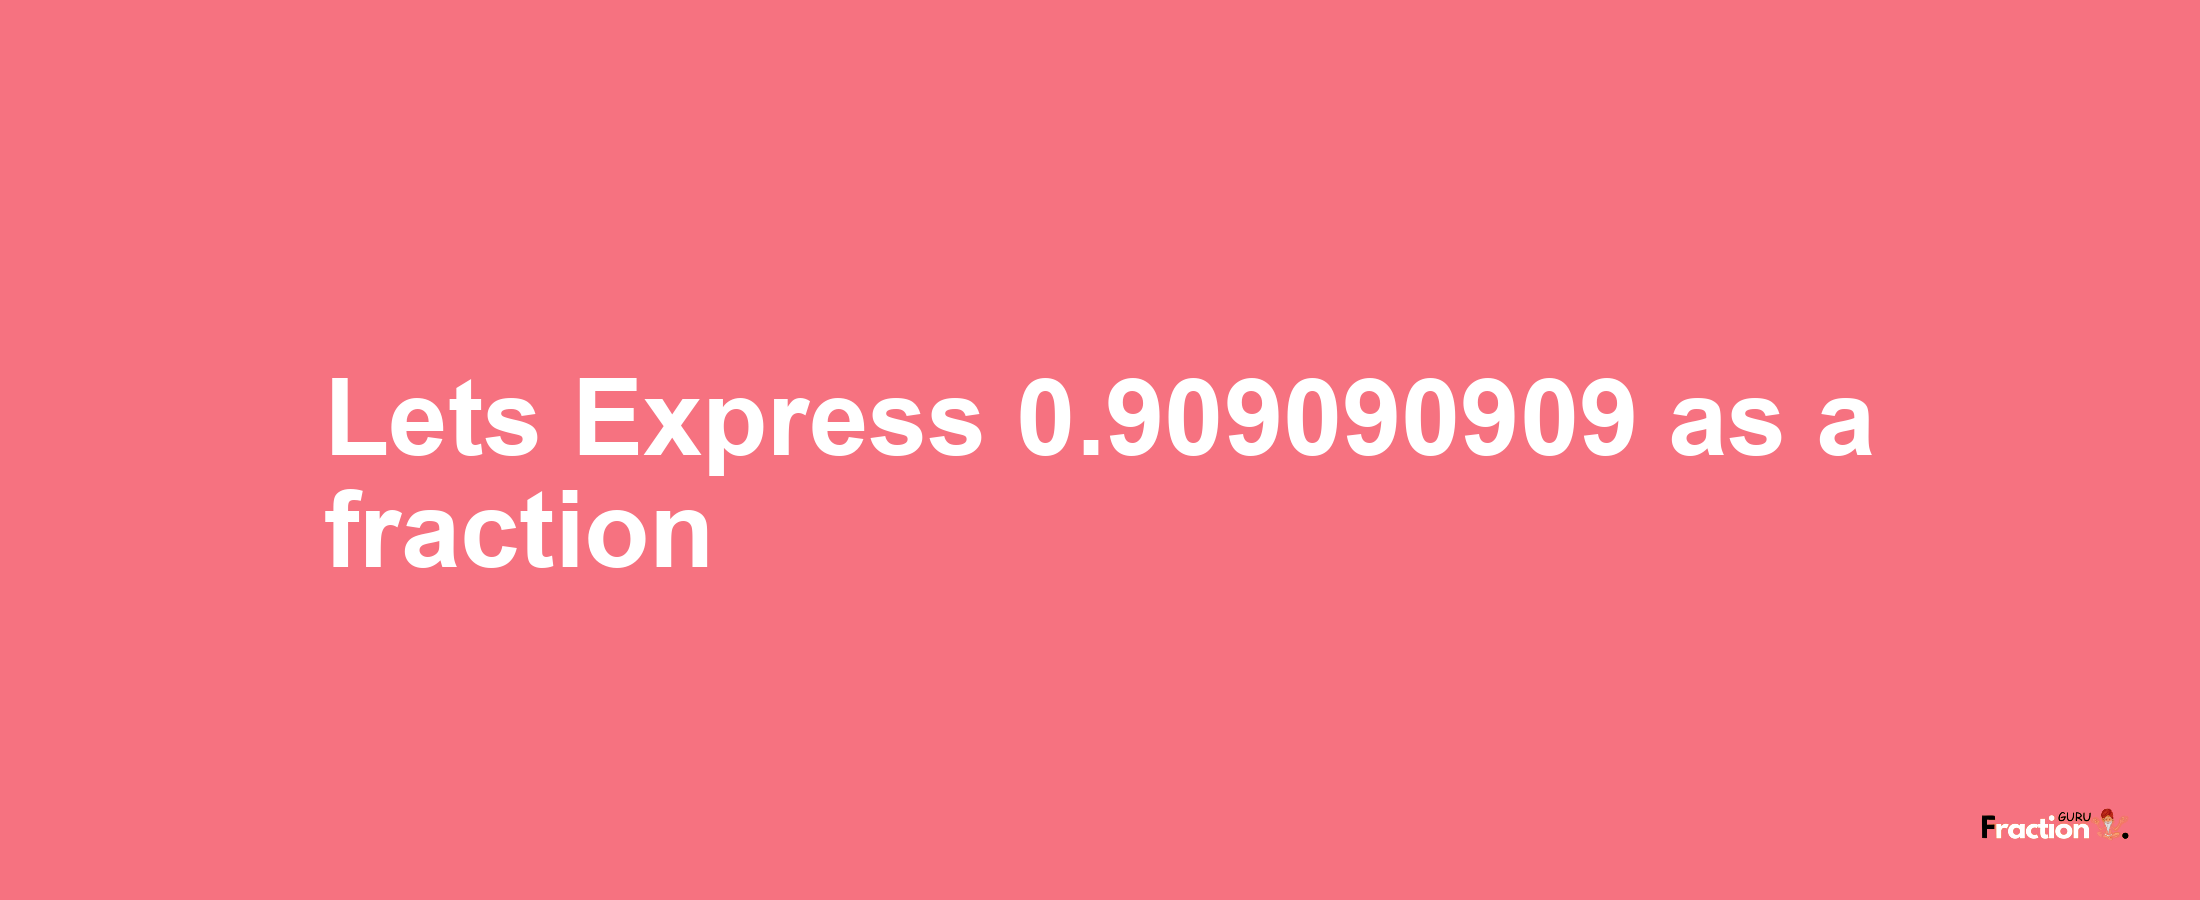 Lets Express 0.909090909 as afraction